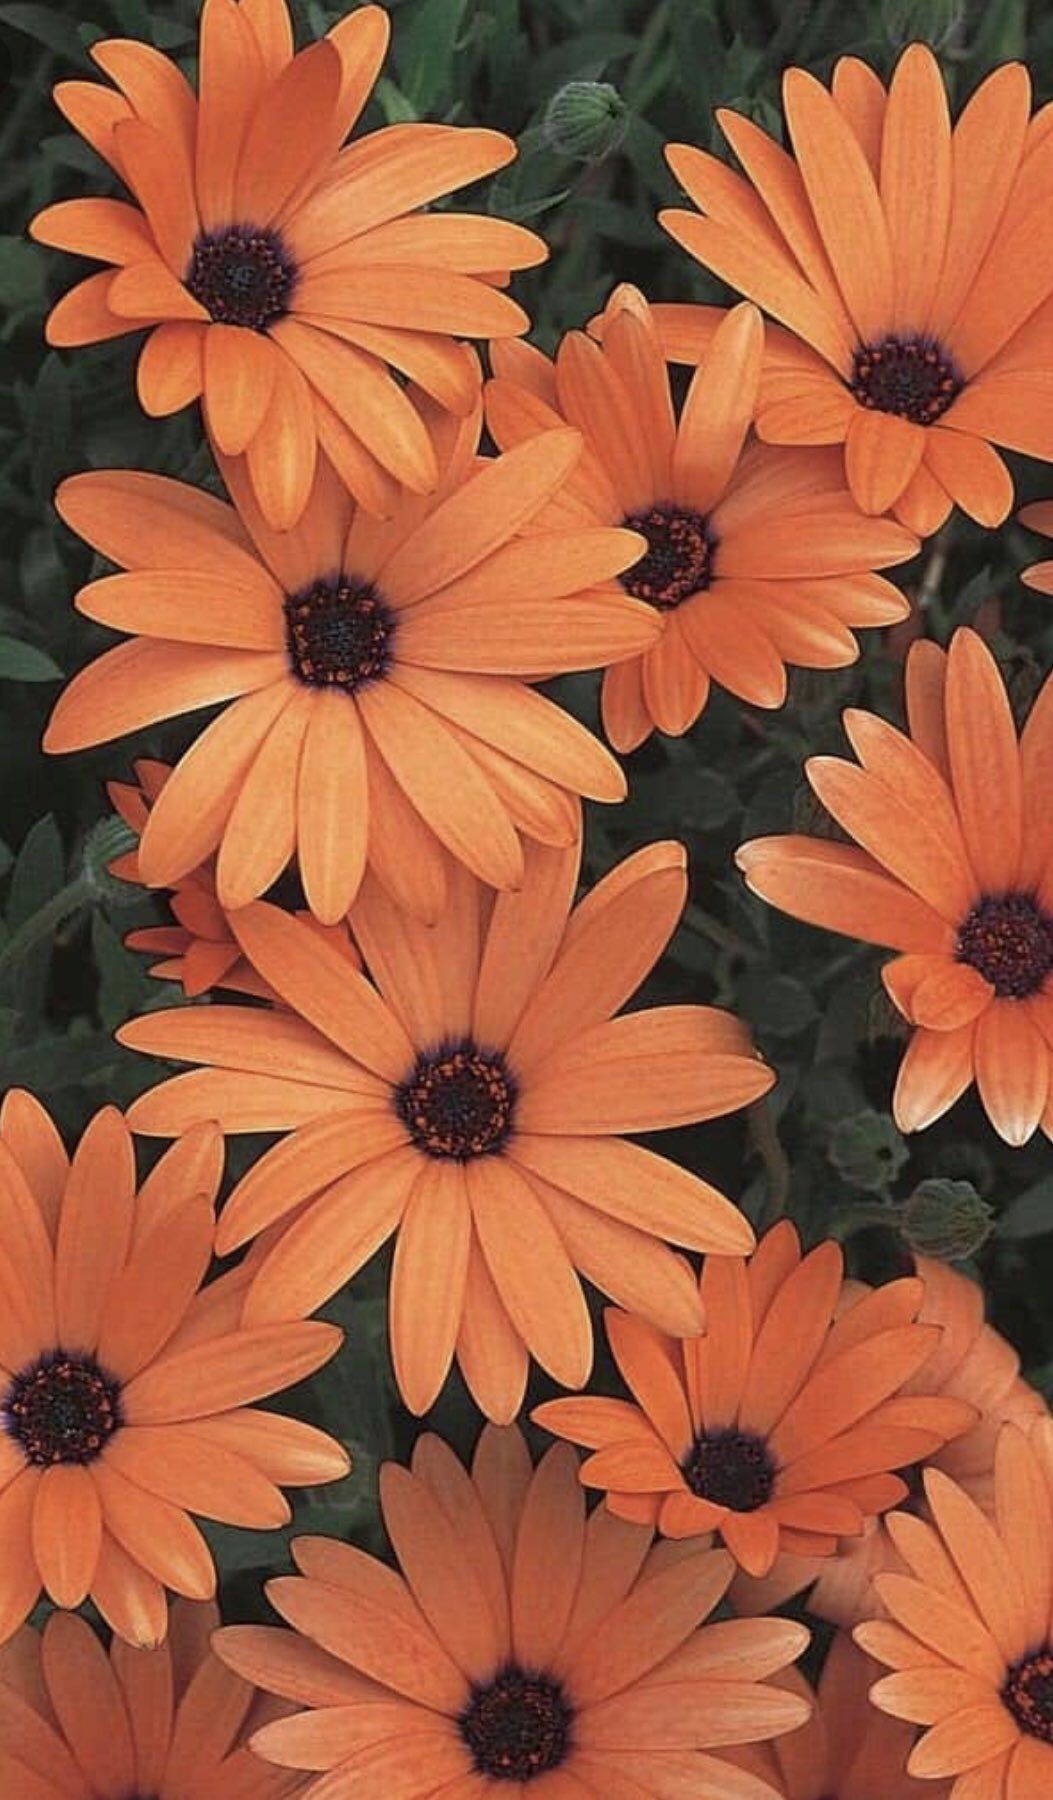 A bunch of orange flowers with green leaves in the background - Orange